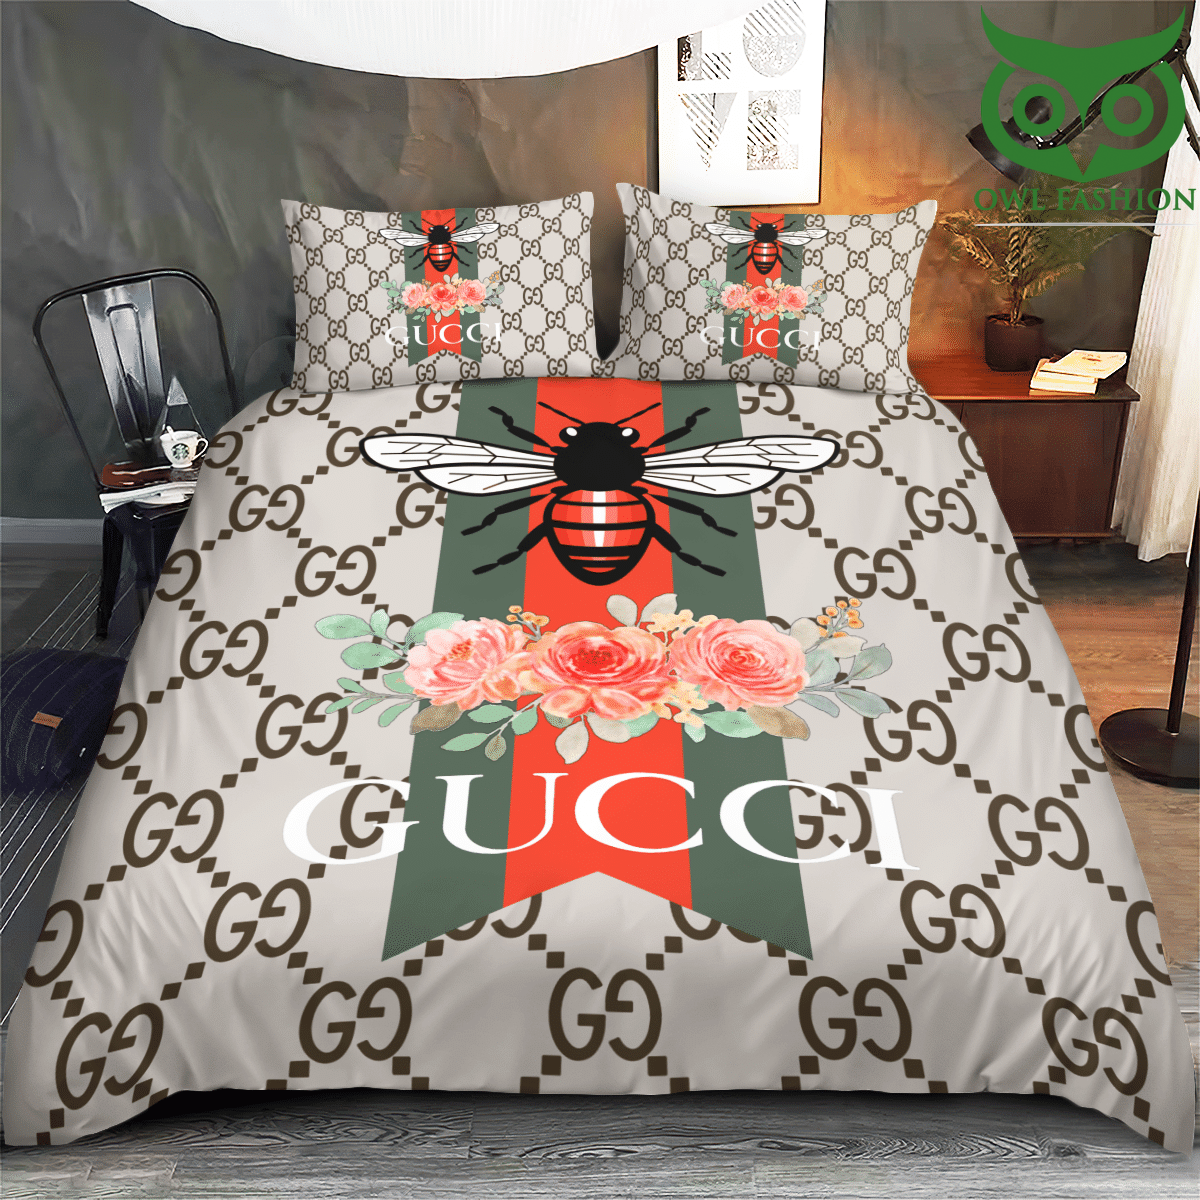 65 Rose and bee Gucci luxury bedding set